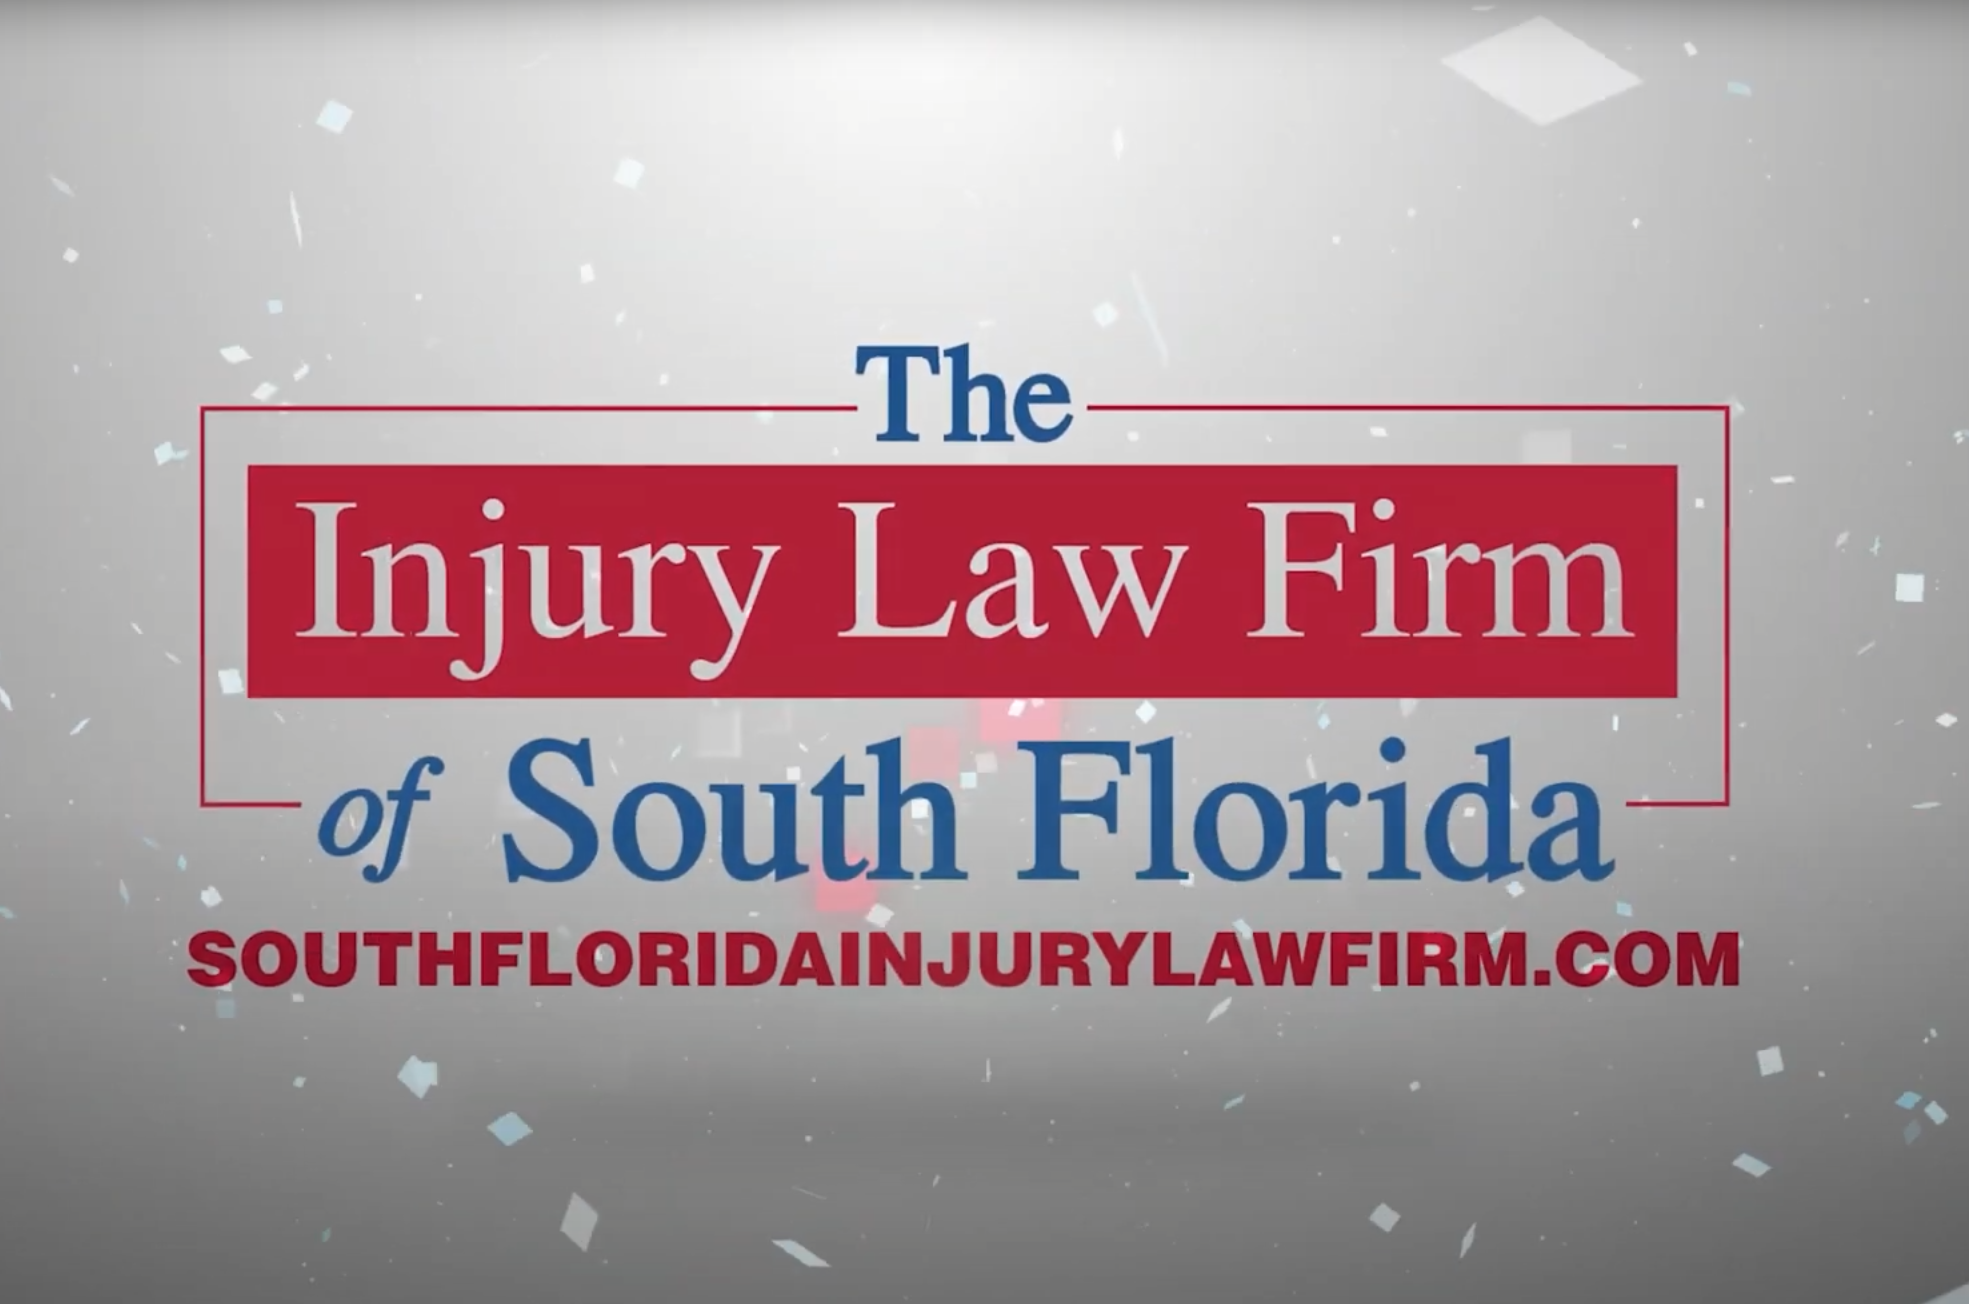 Injury Law Firm Of South Florida 2 Injury Law Firm of South Florida